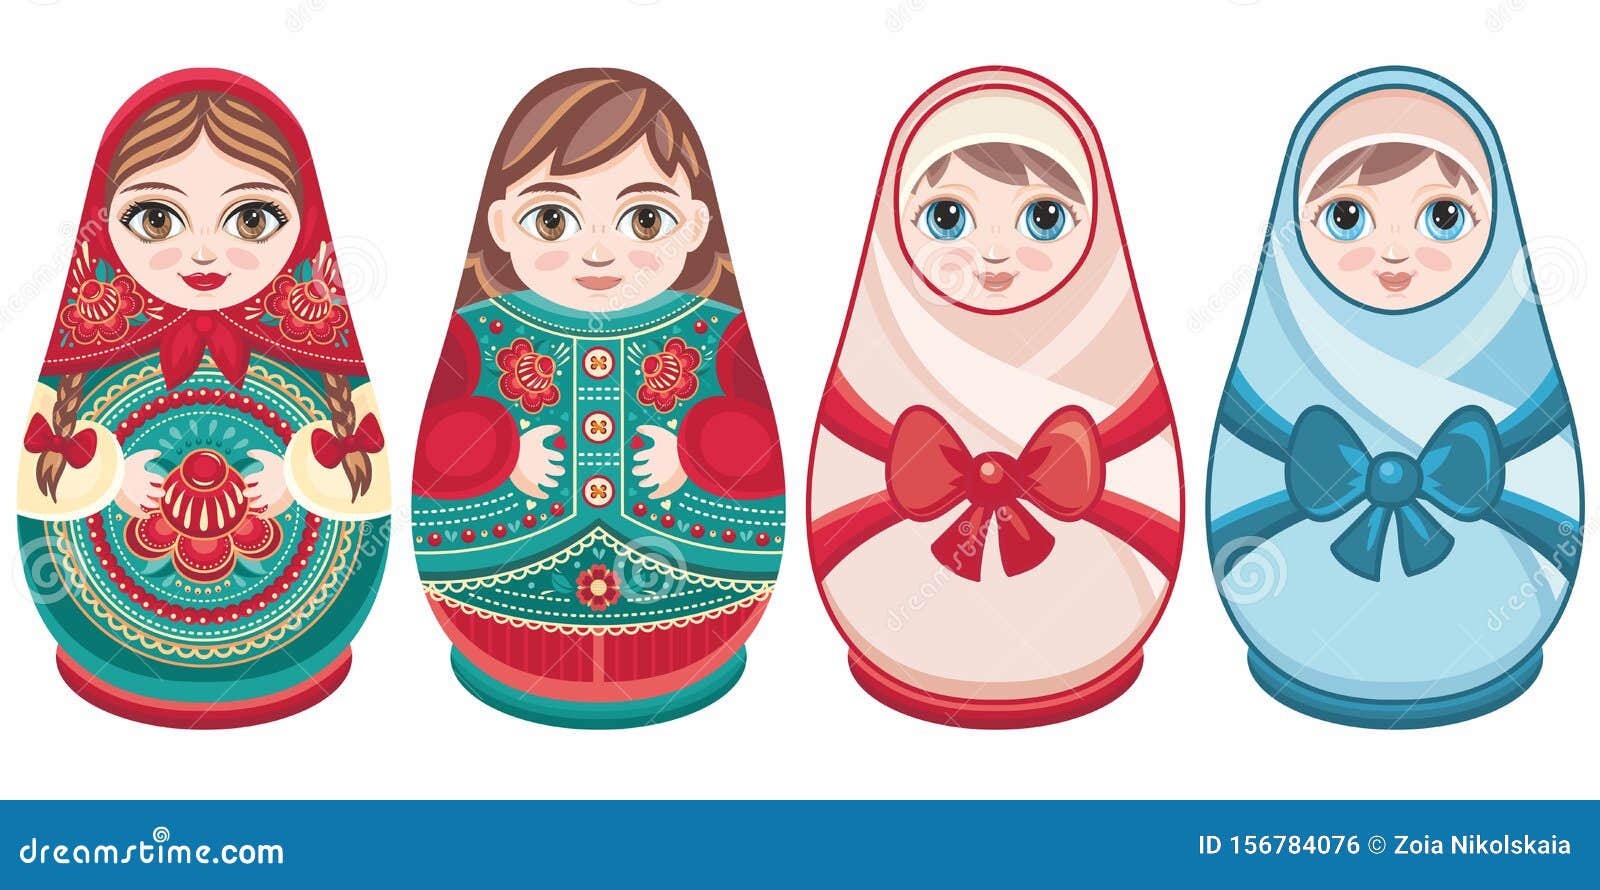 russian dolls inside of each other